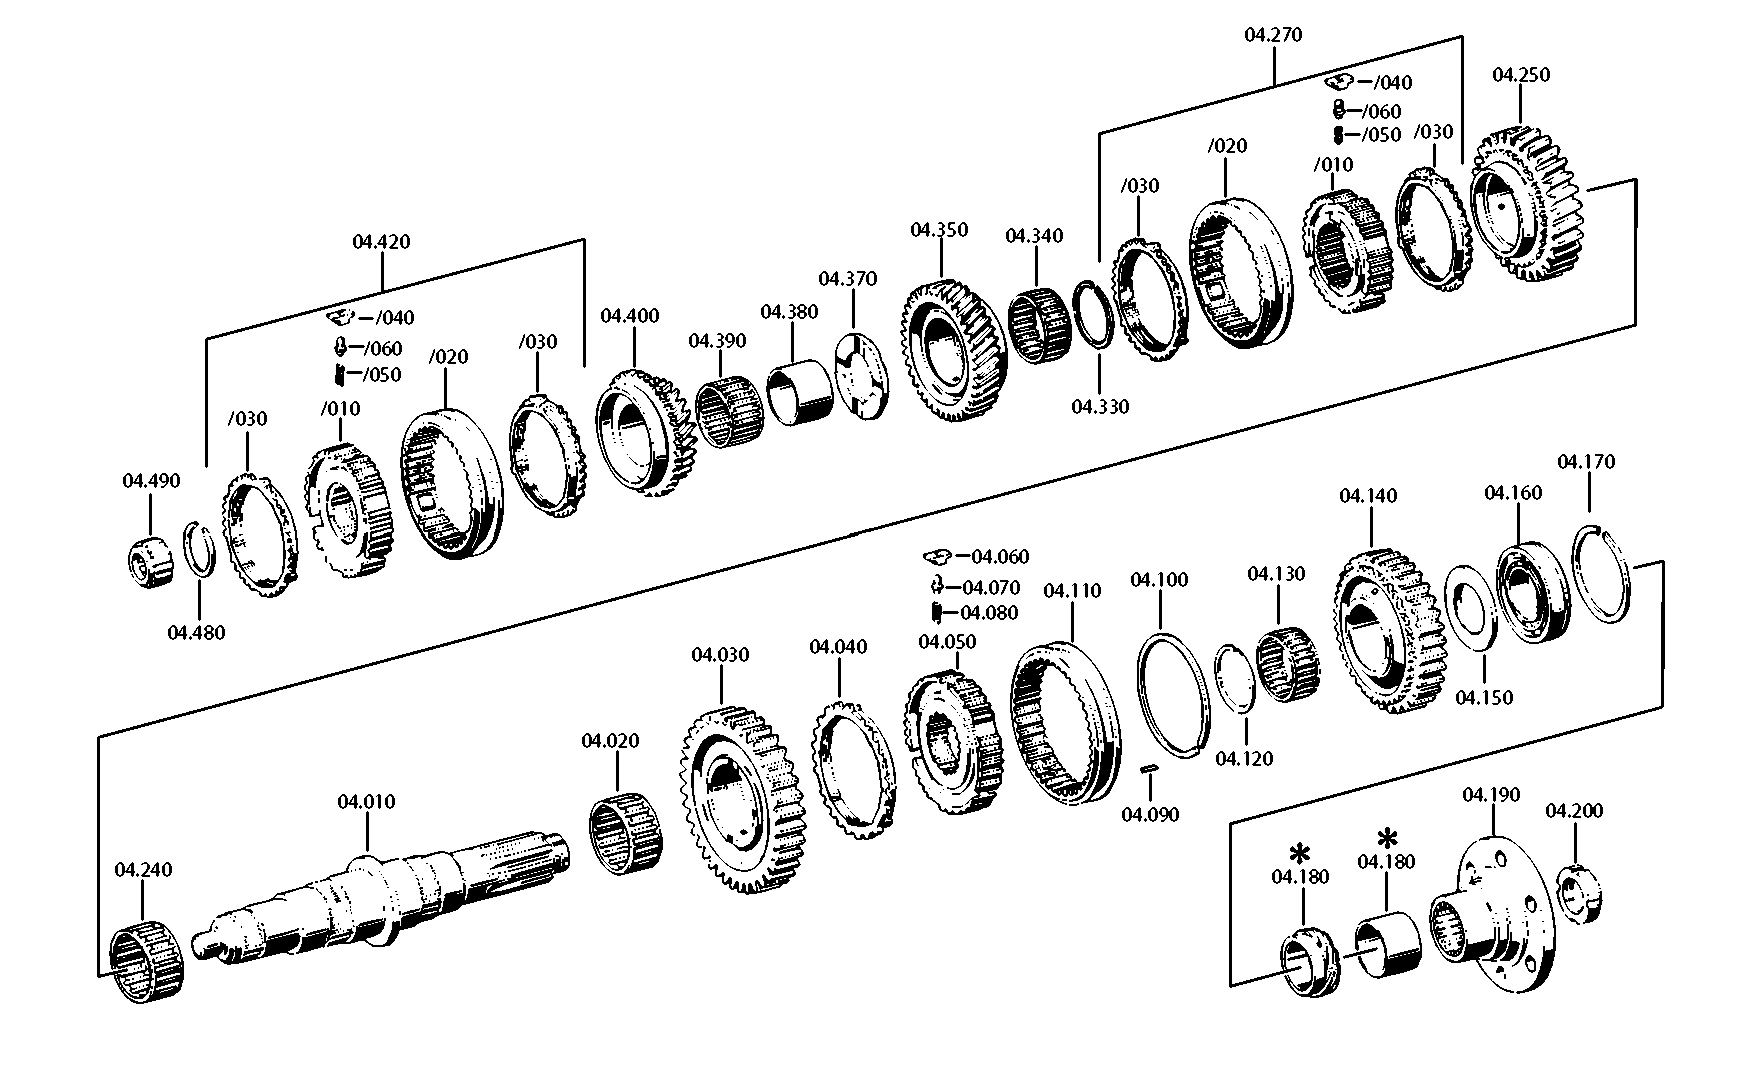 drawing for SKF 170741 - NEEDLE CAGE (figure 3)